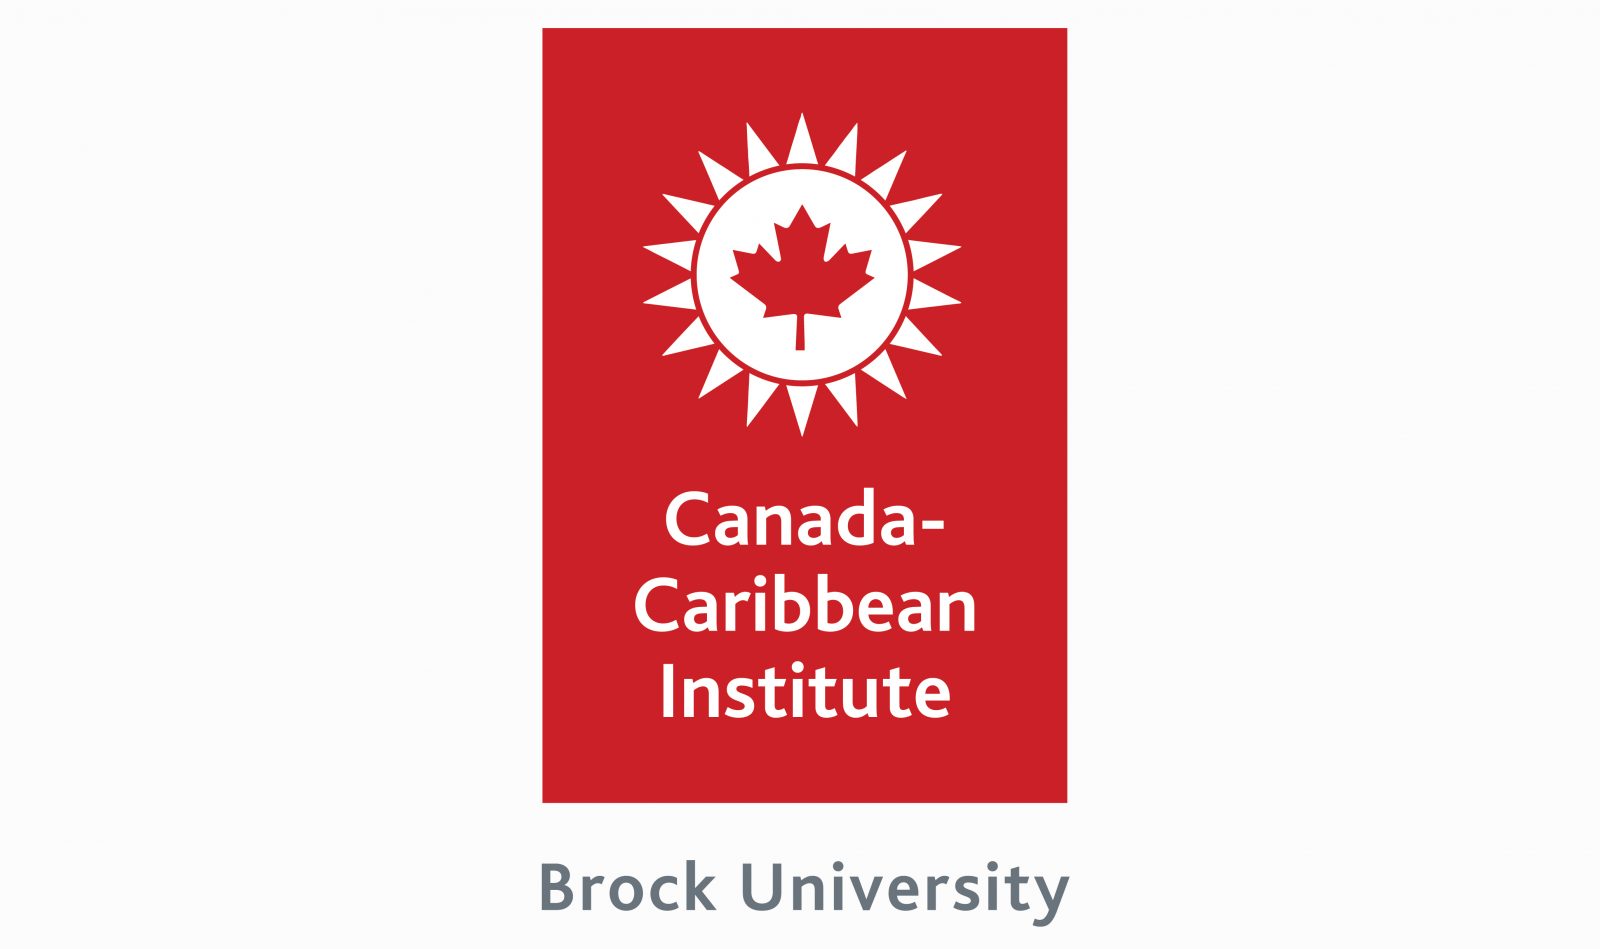 Canada-Caribbean Institute logo in red and white.